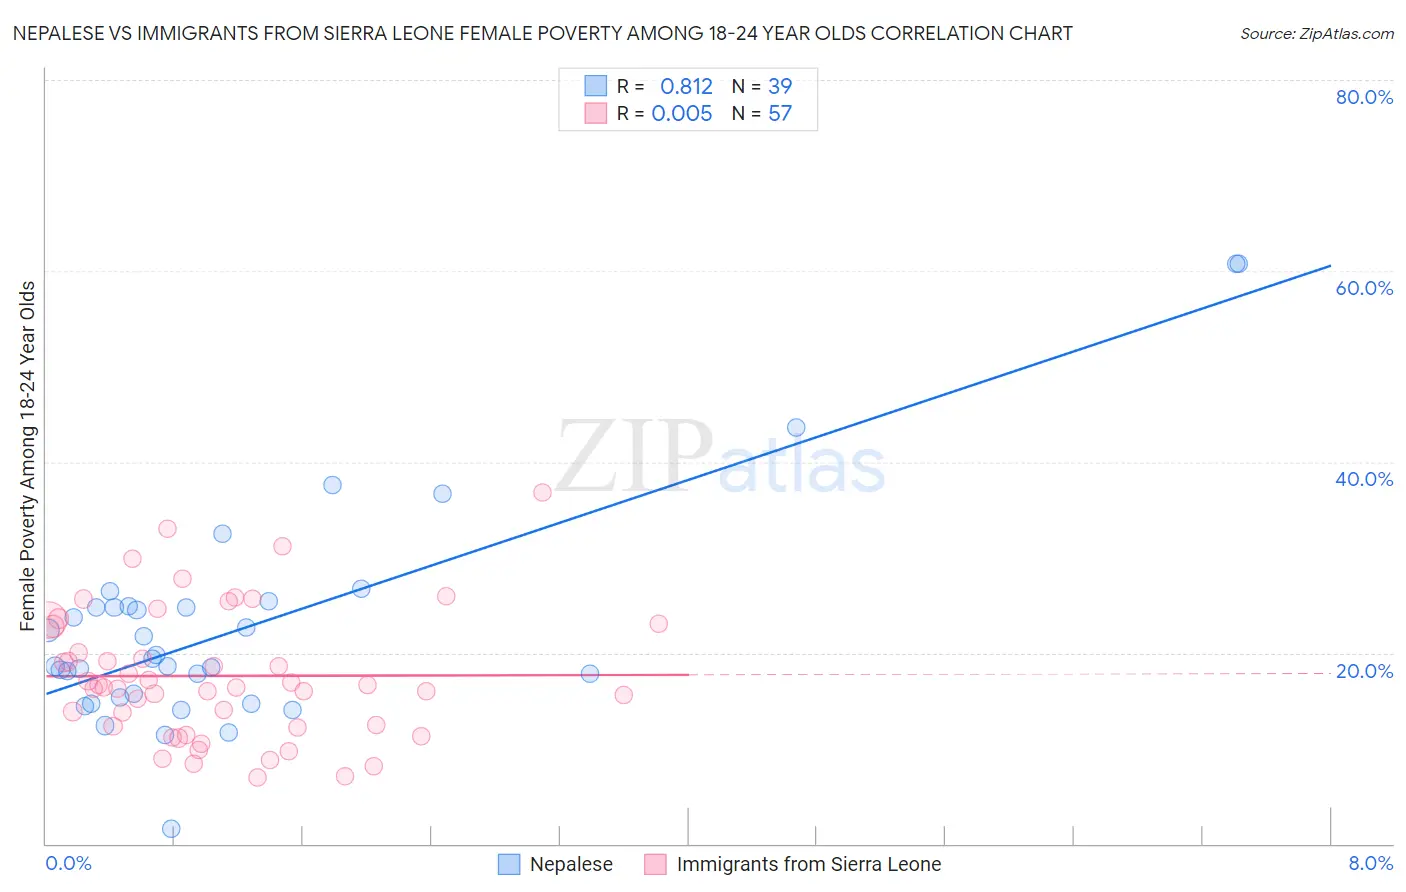 Nepalese vs Immigrants from Sierra Leone Female Poverty Among 18-24 Year Olds